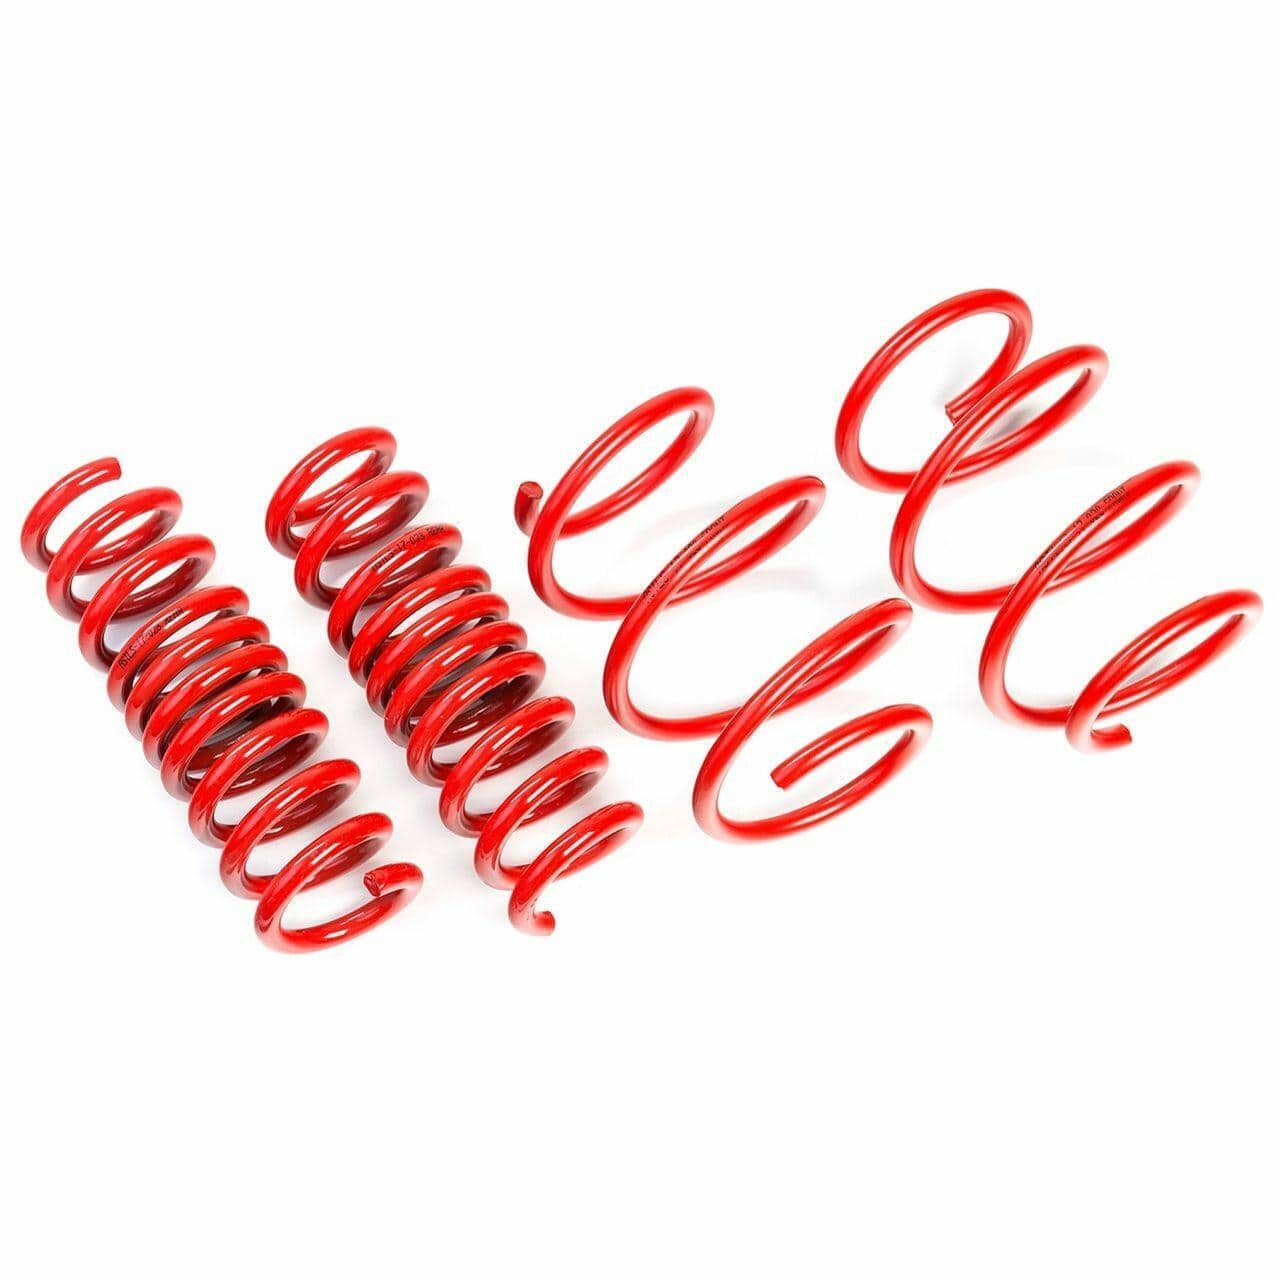 AST Suspension Lowering Springs (30MM/30MM) - 2000-2007 BMW X5 4.4i/4.6iS/3.0D w/ Air Suspension HA (E53) ASTLS-14-465